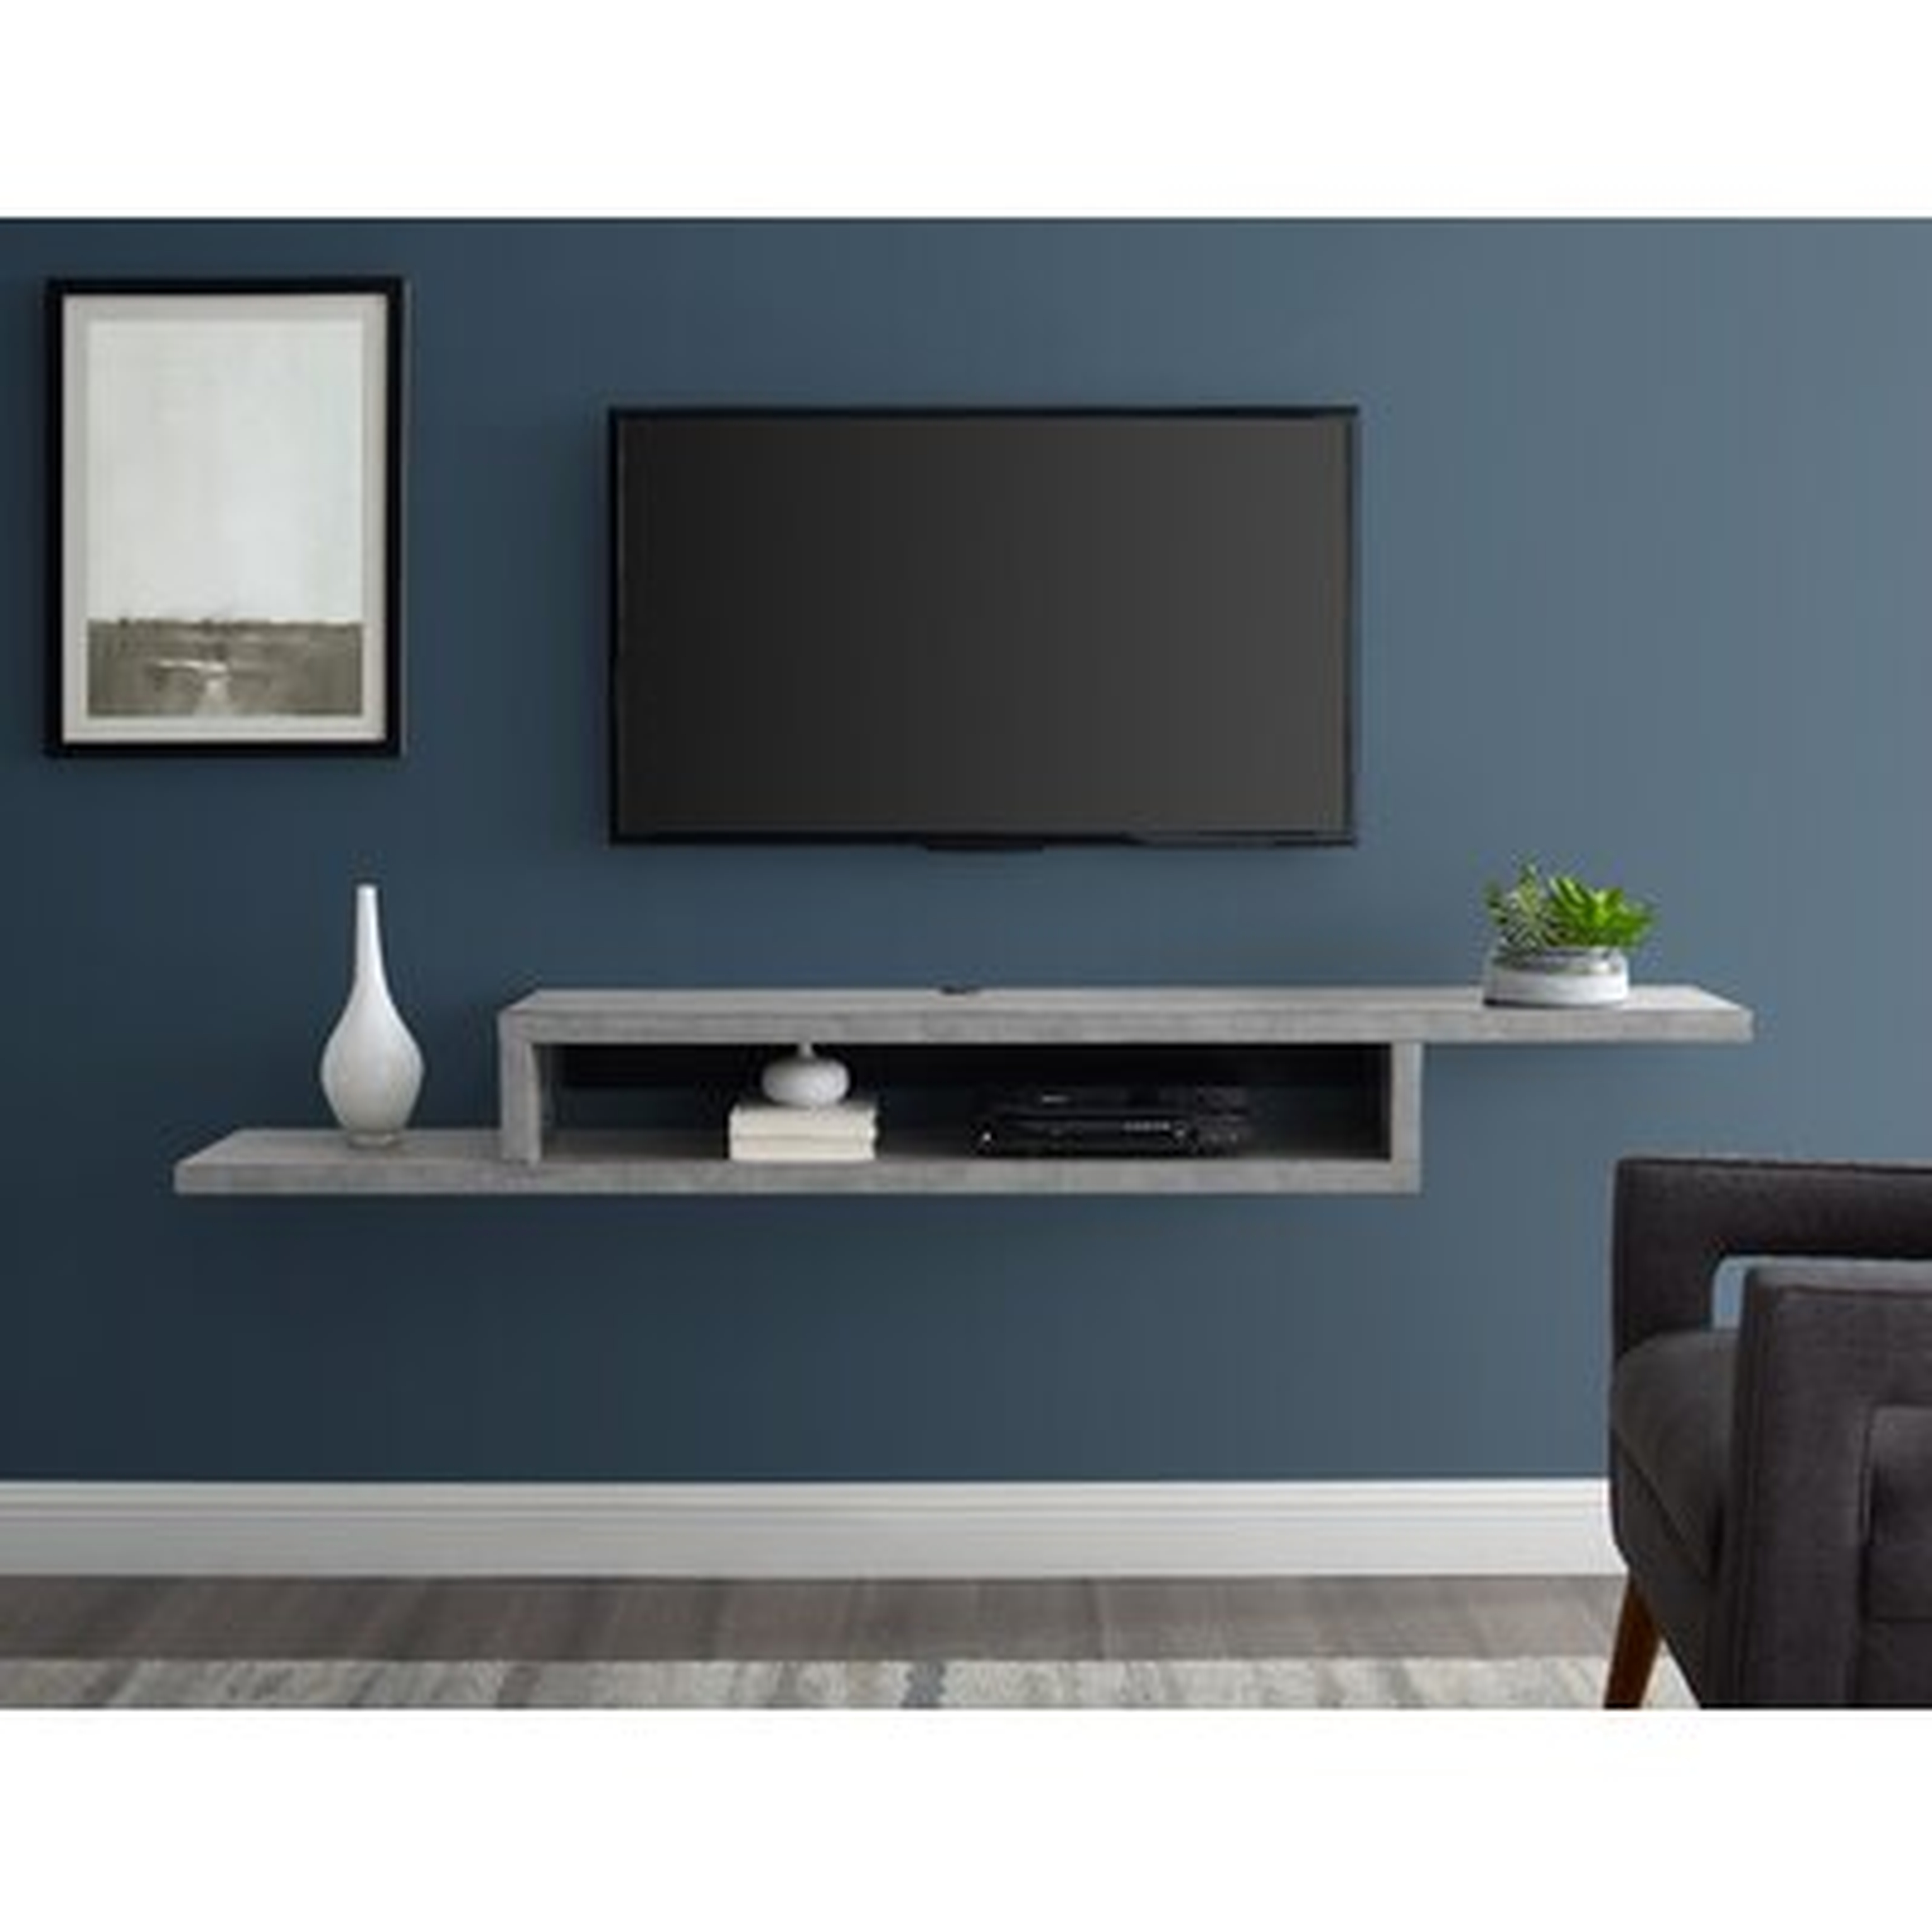 Mauck Asymmetrical Floating Wall Mounted TV Console, 72Inch, light brown - Wayfair